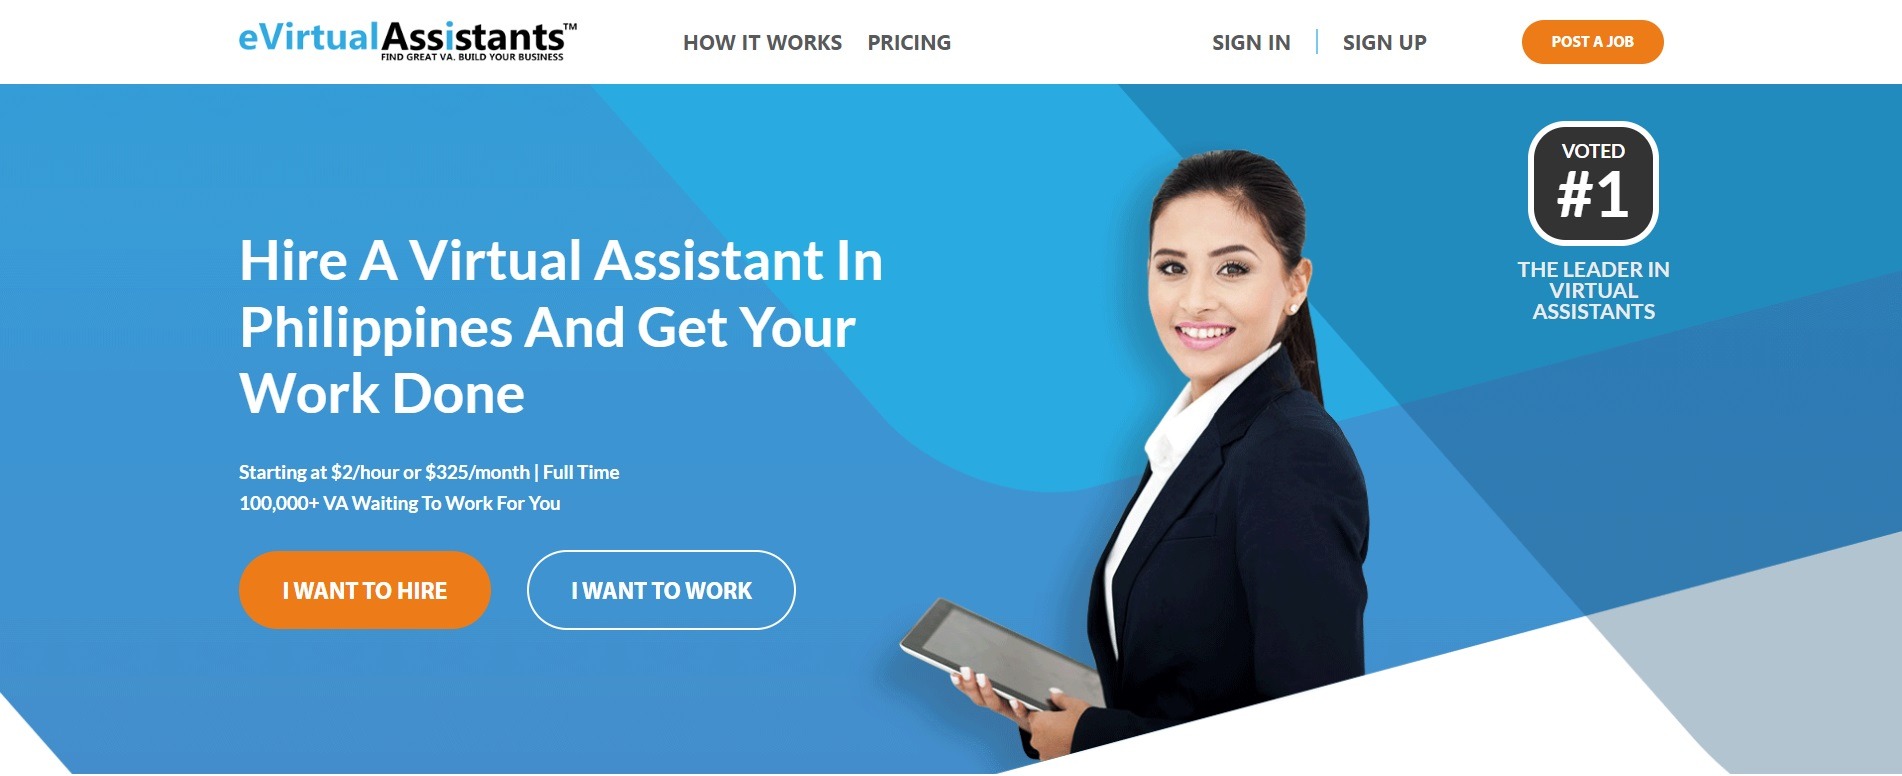 A screenshot of the eVirtual Assistants website home page.